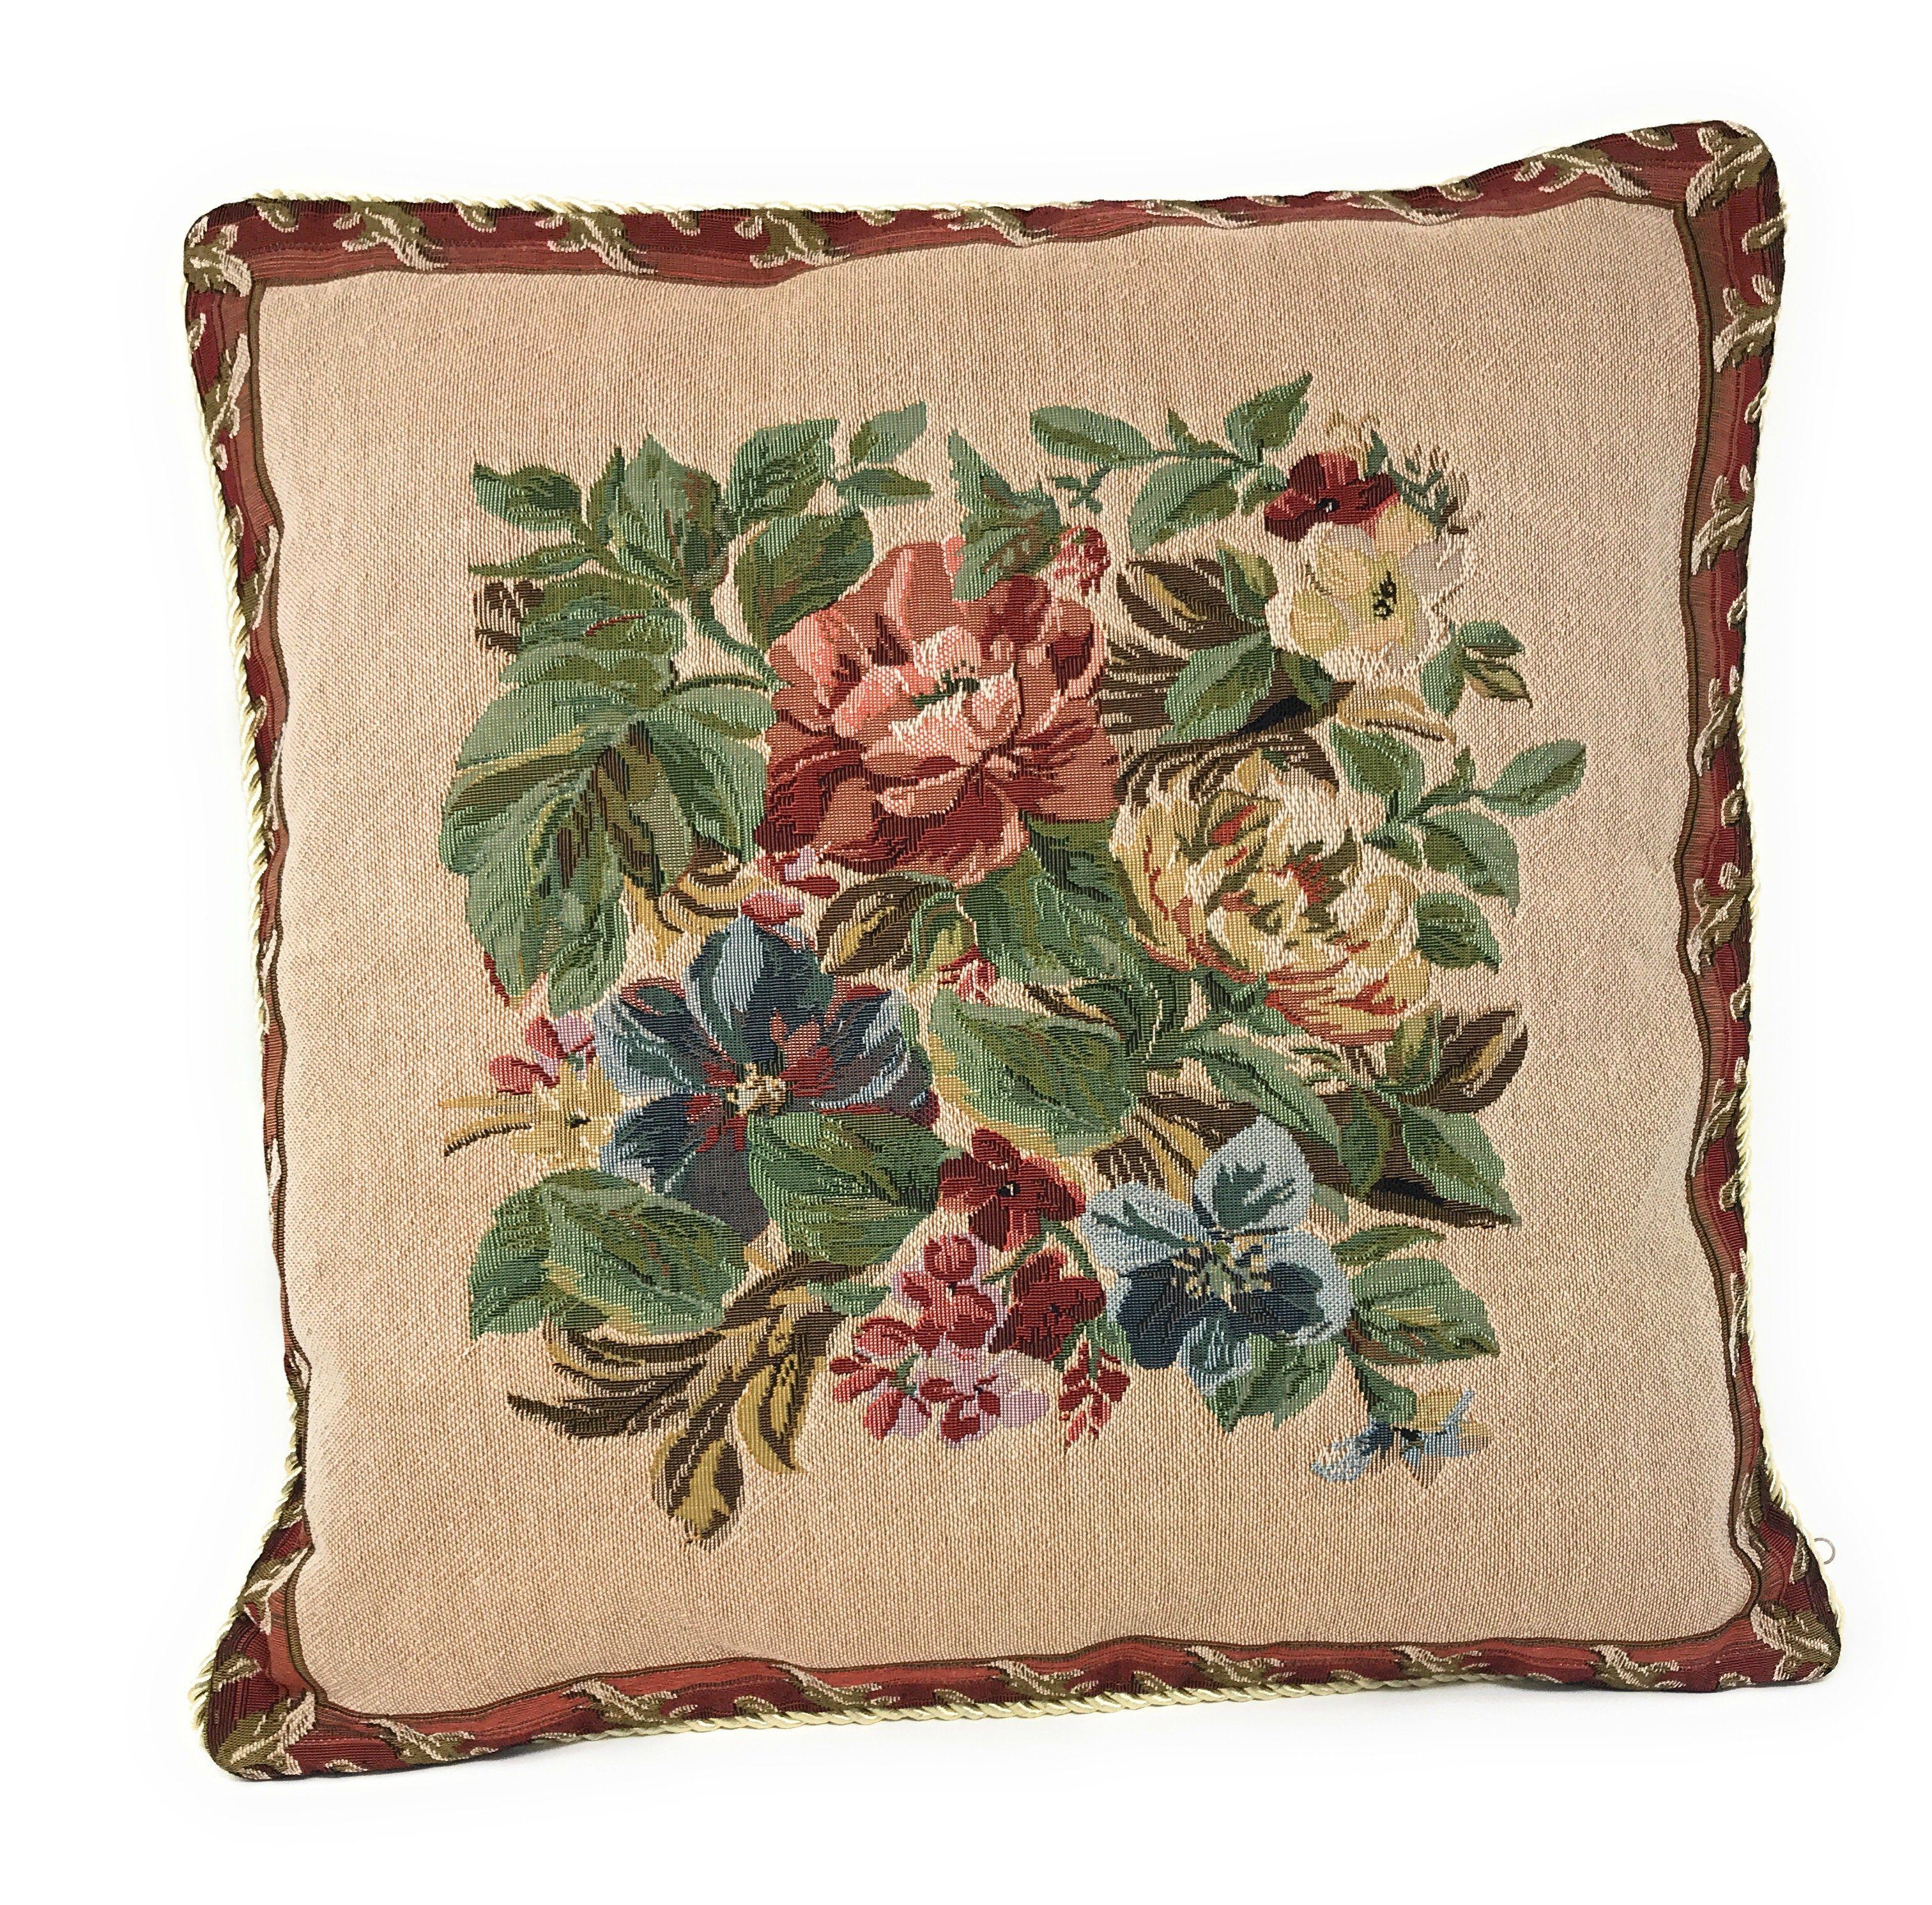 Tache 18 Inch Floral Red Yuletide Blooms Tapestry Throw Pillow Cover (5598) - Tache Home Fashion